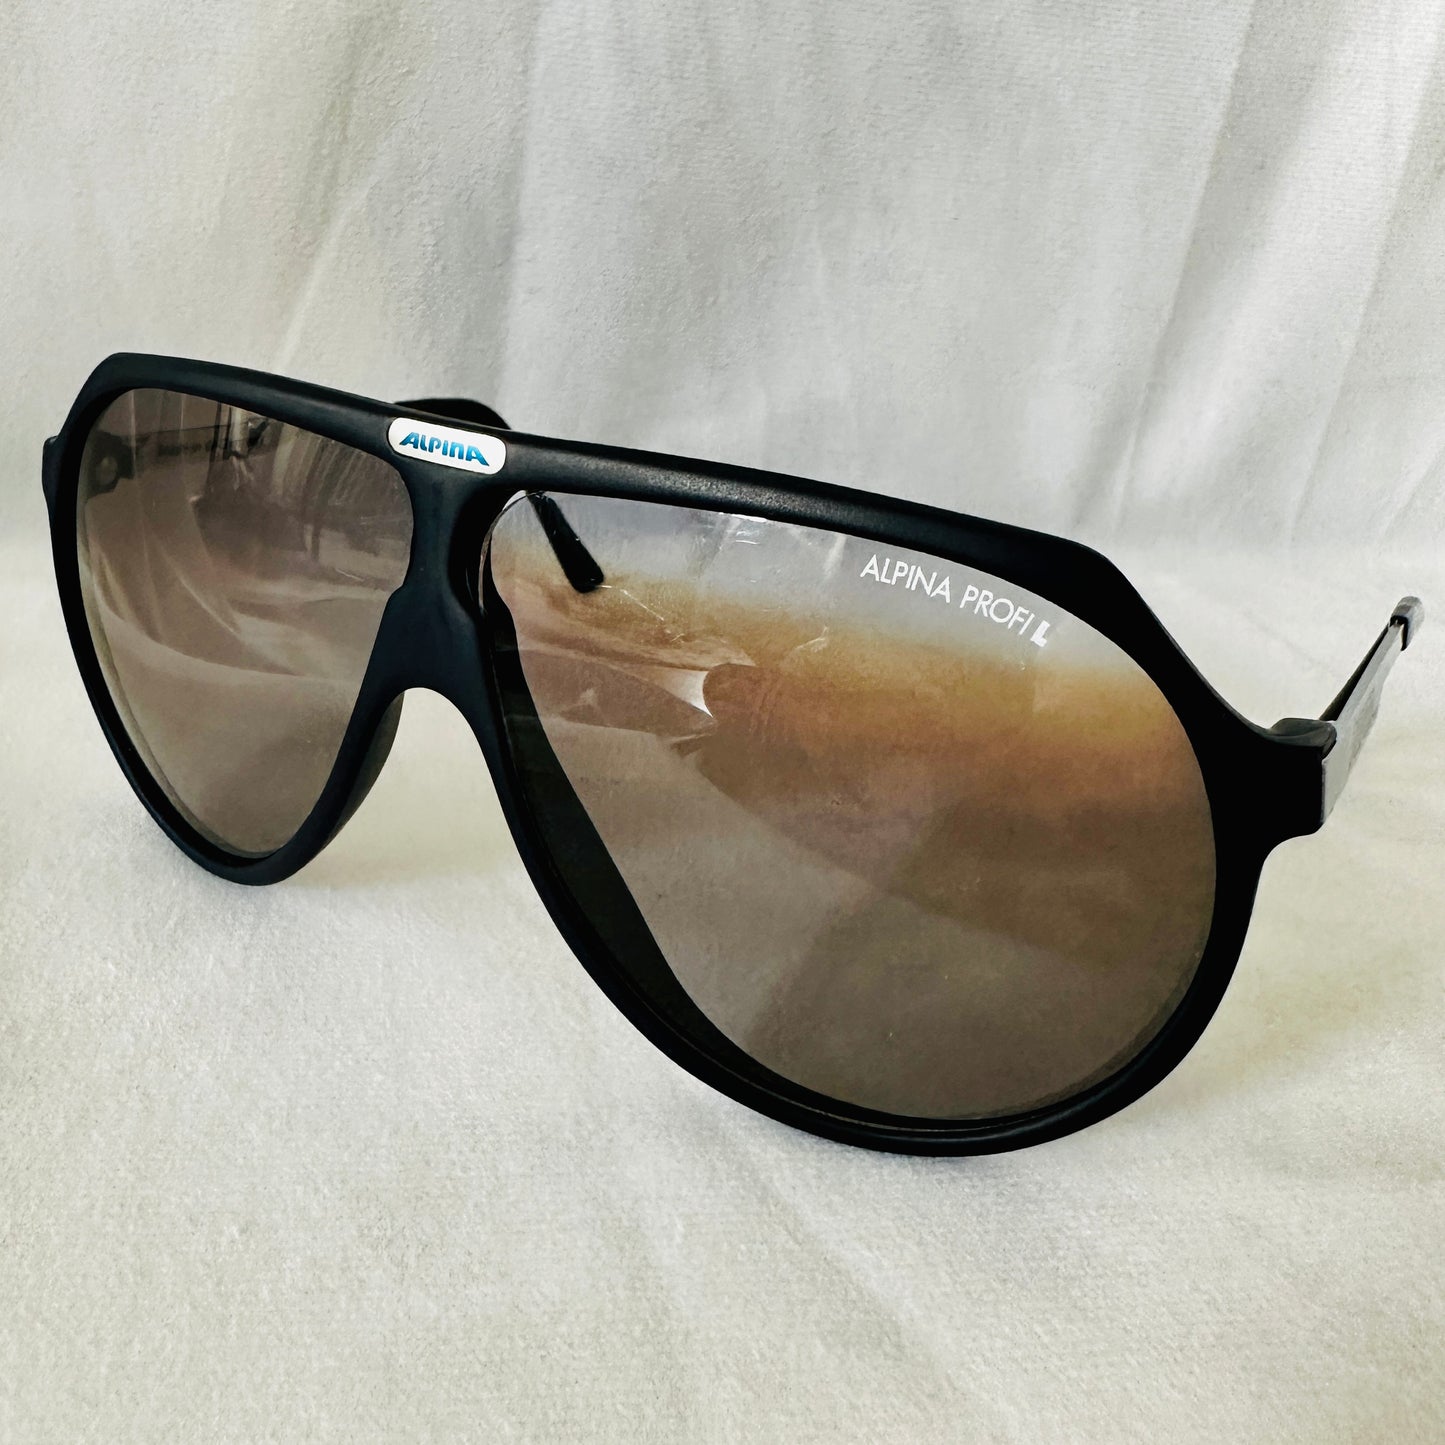 Alpina 80s Vintage Sunglasses - Made in West Germany